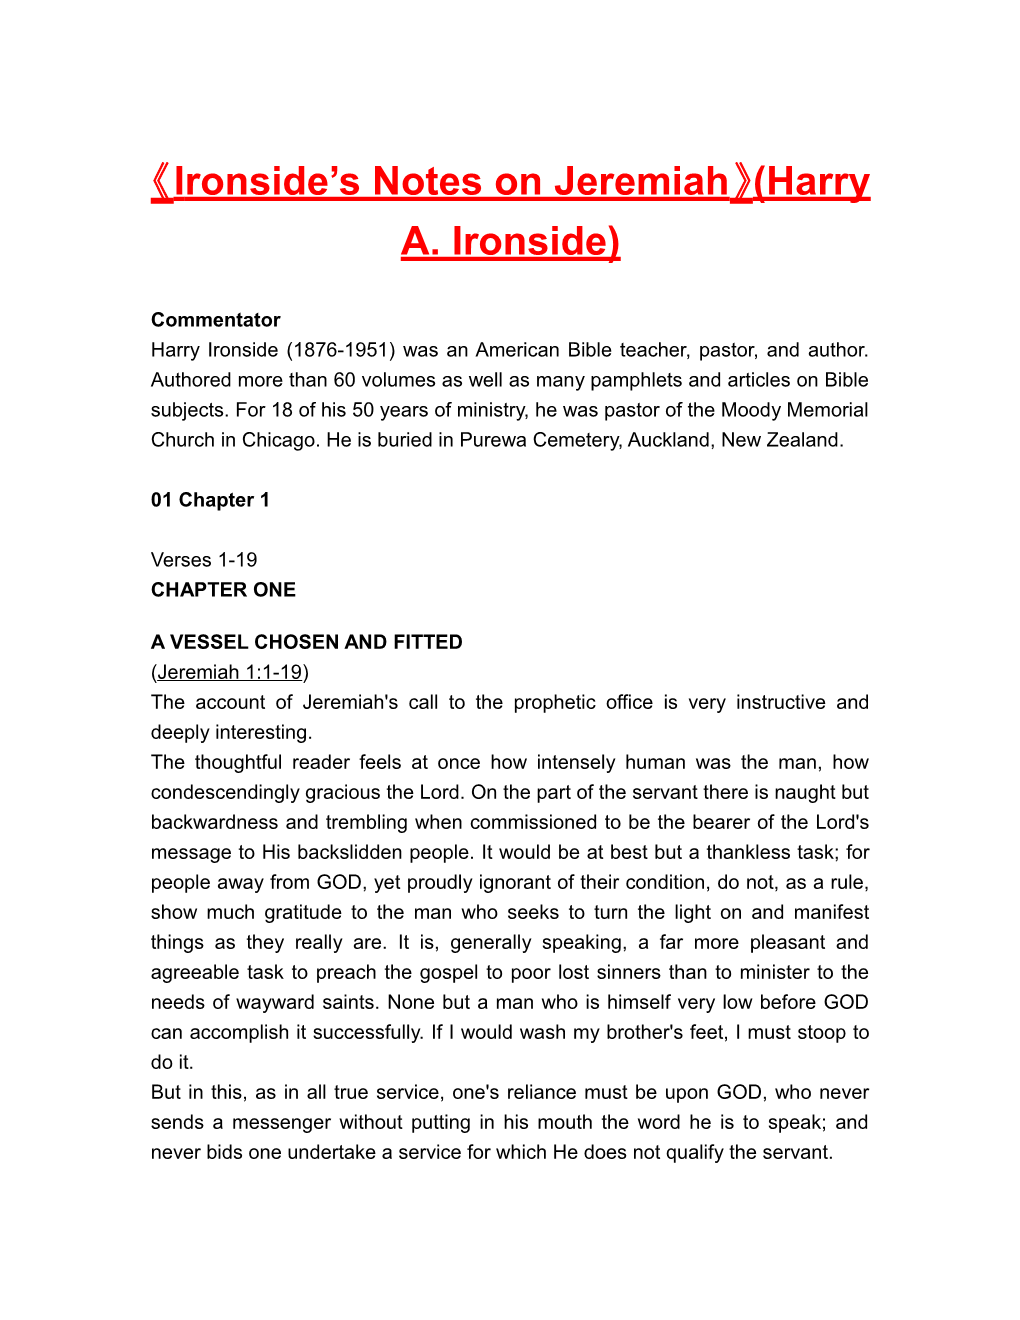 Ironside S Notes on Jeremiah (Harry A. Ironside)